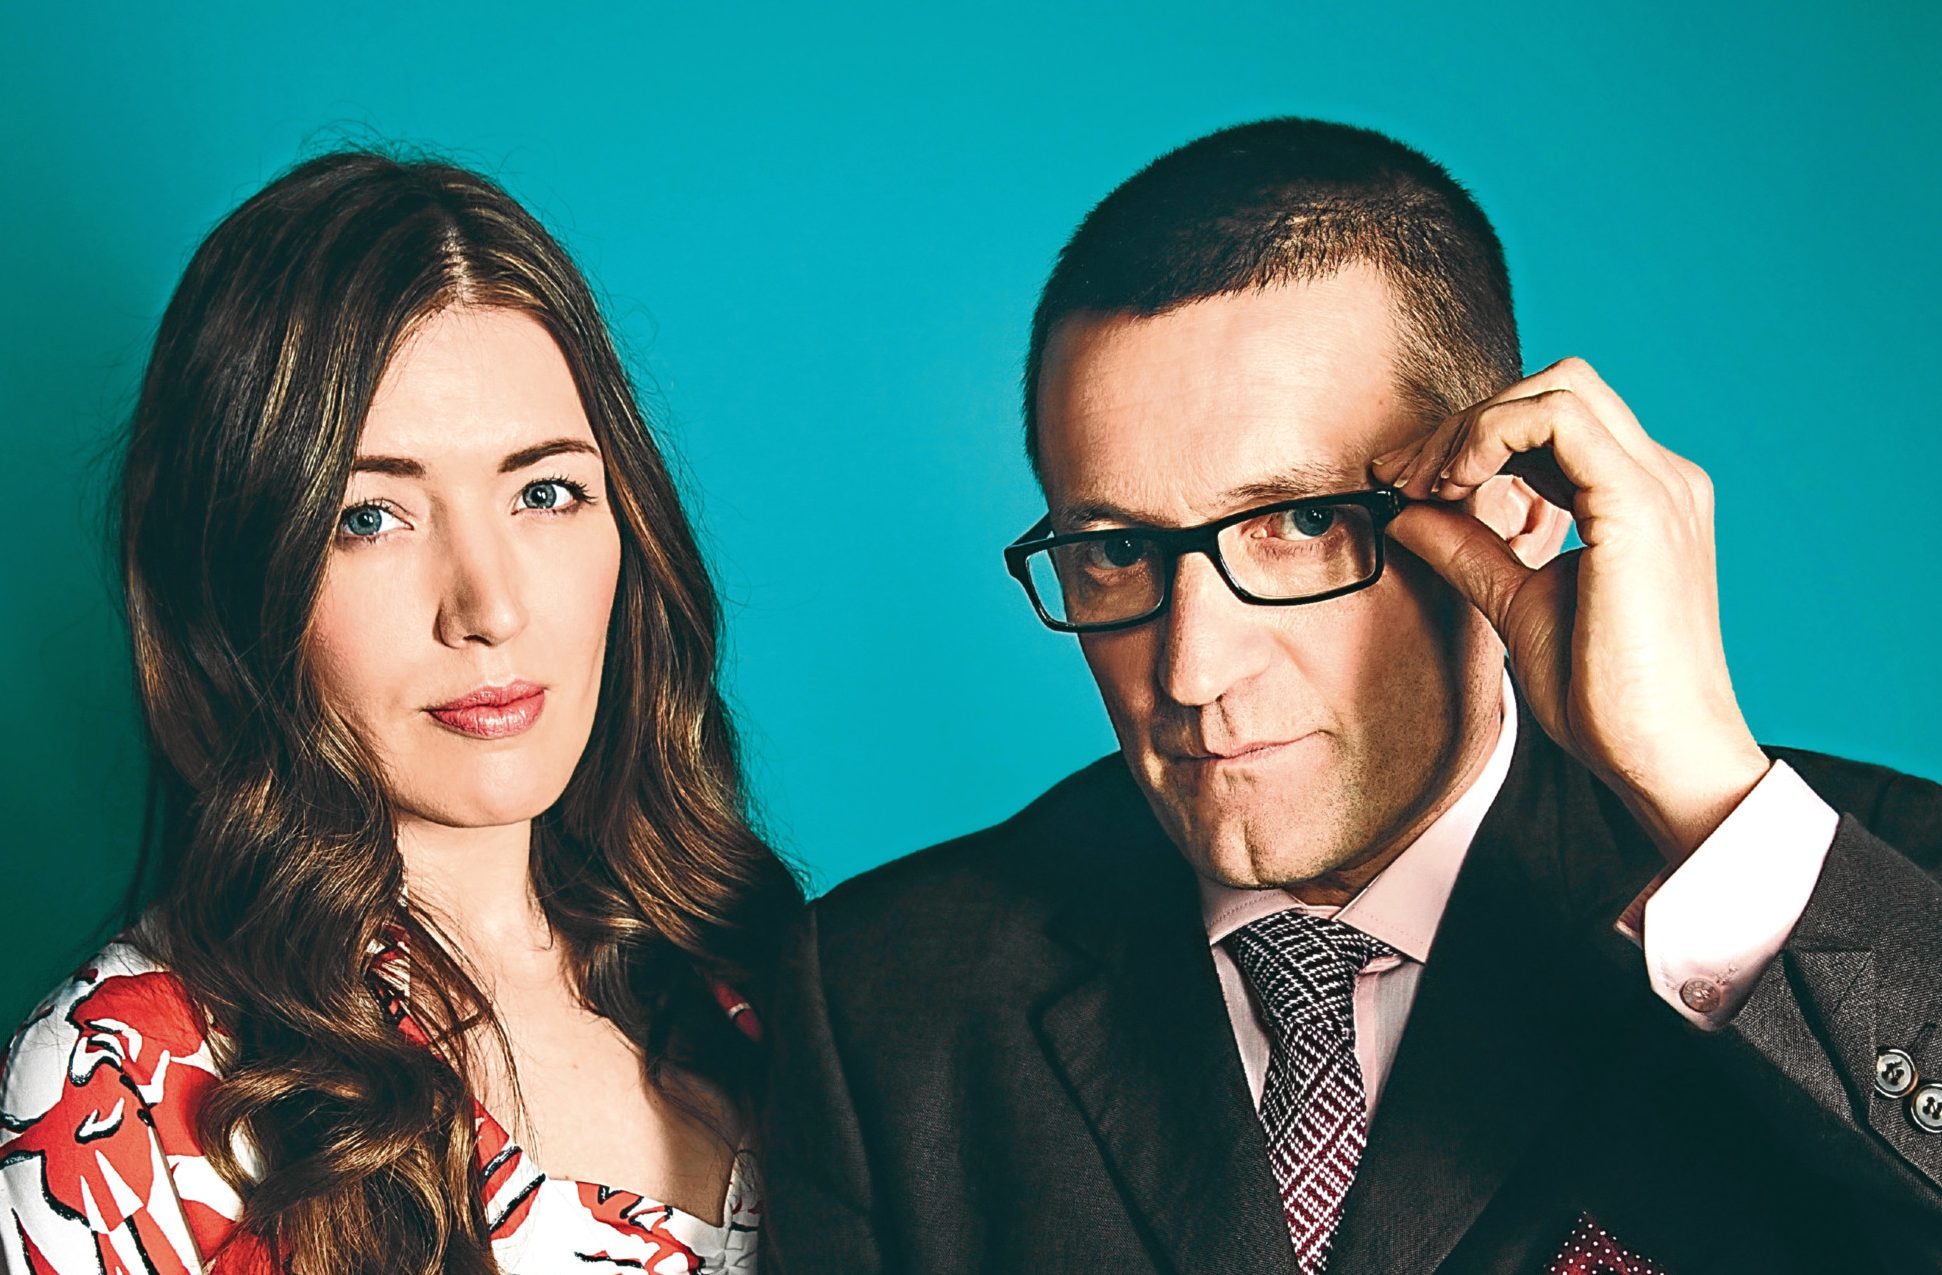 Paul Heaton and Jacqui Abbot, former Beautiful South members (Andrew Whitton)